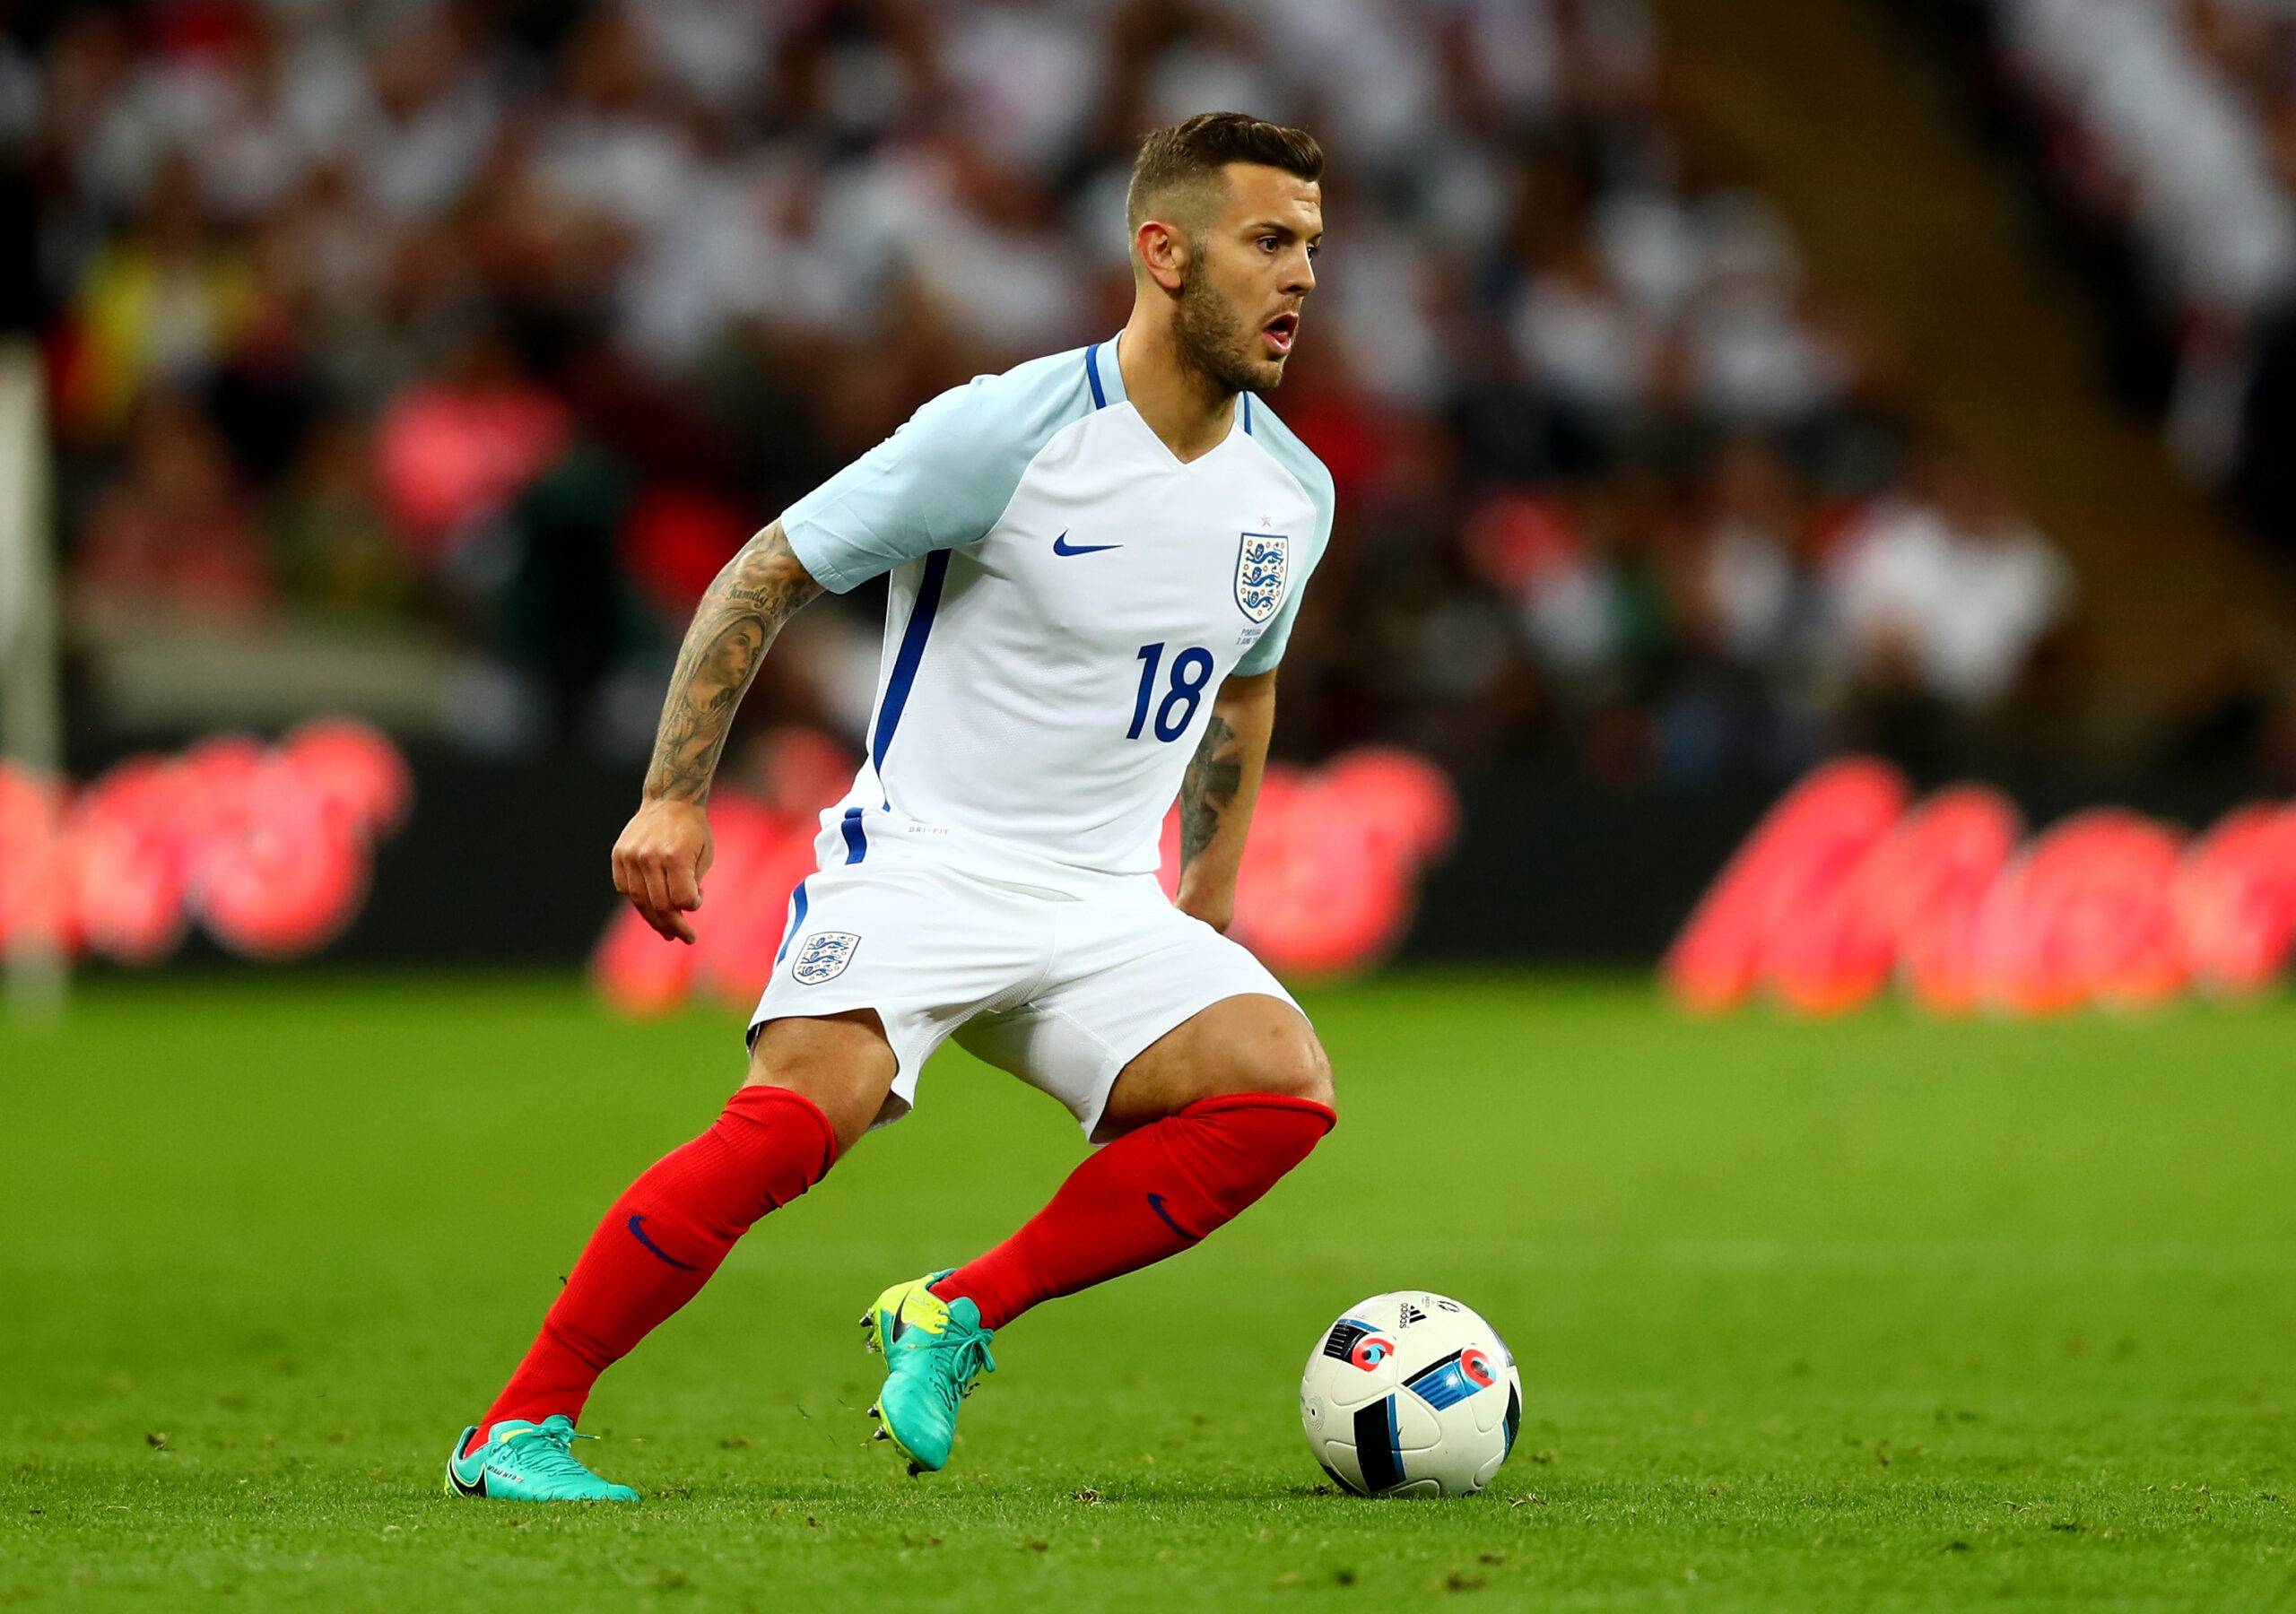 Jack Wilshere on the ball for England